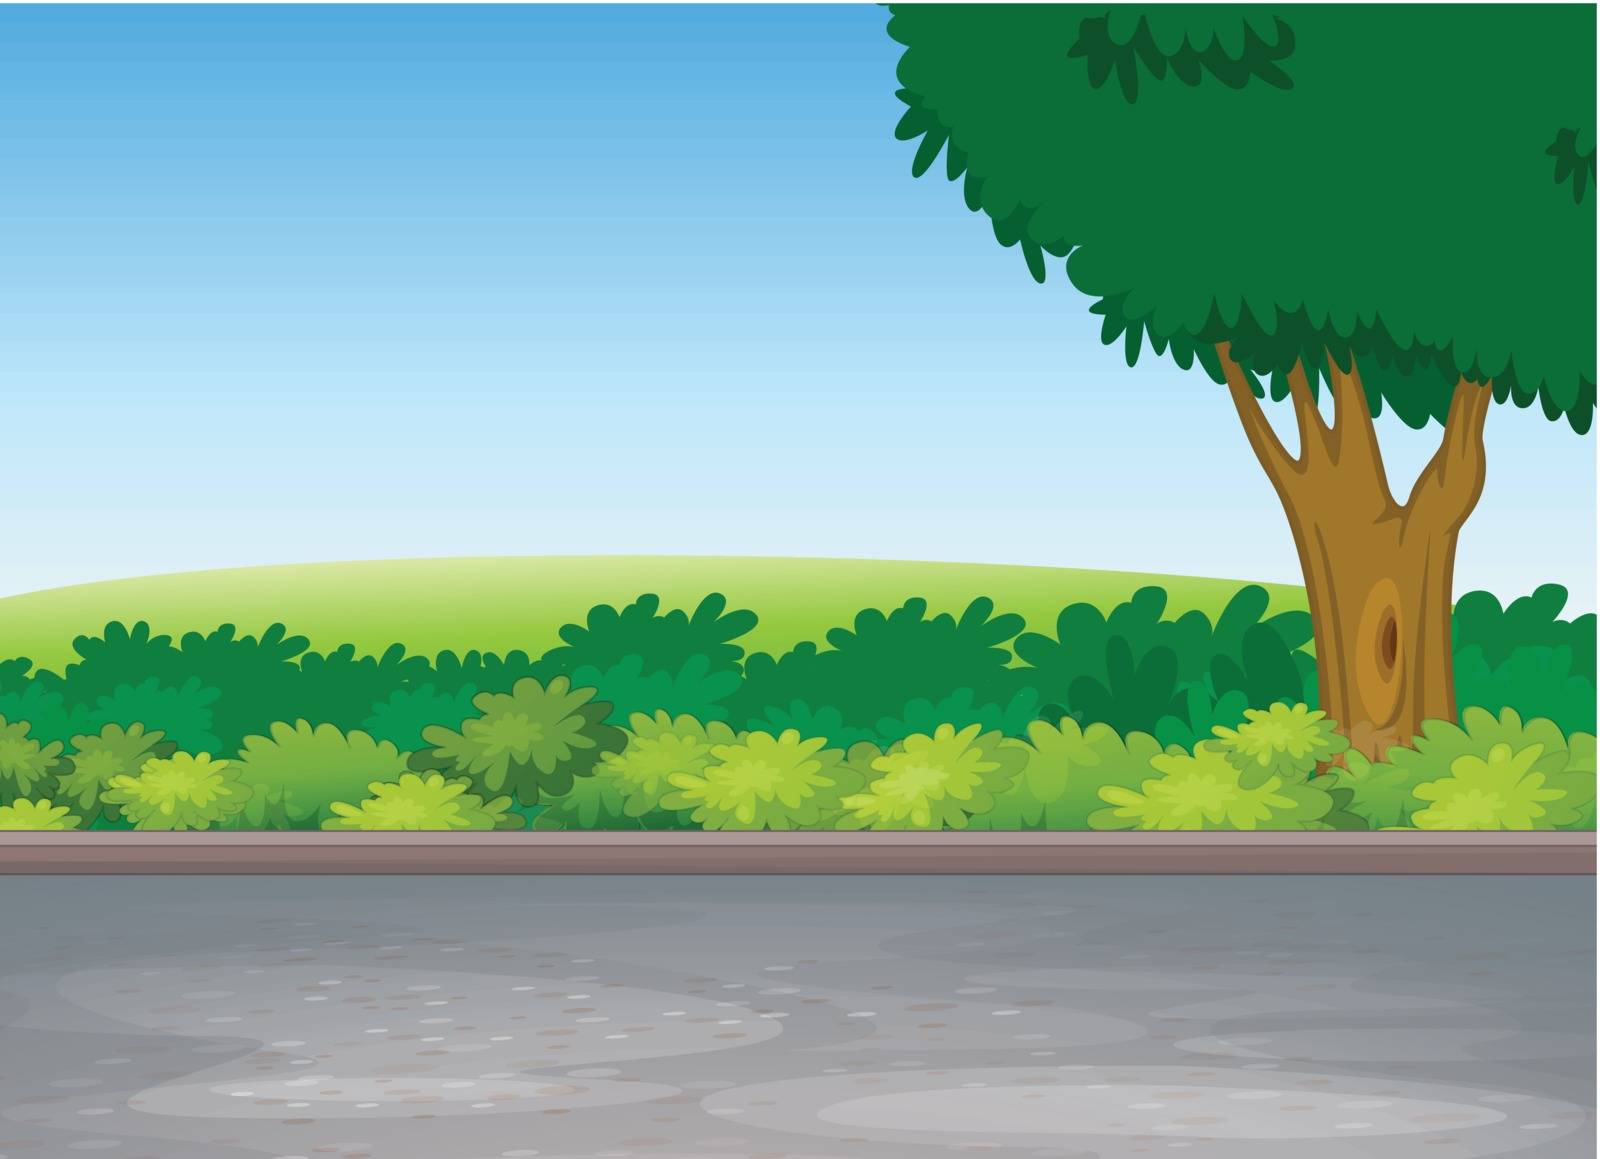 illustration of tree beside road in a beautiful nature